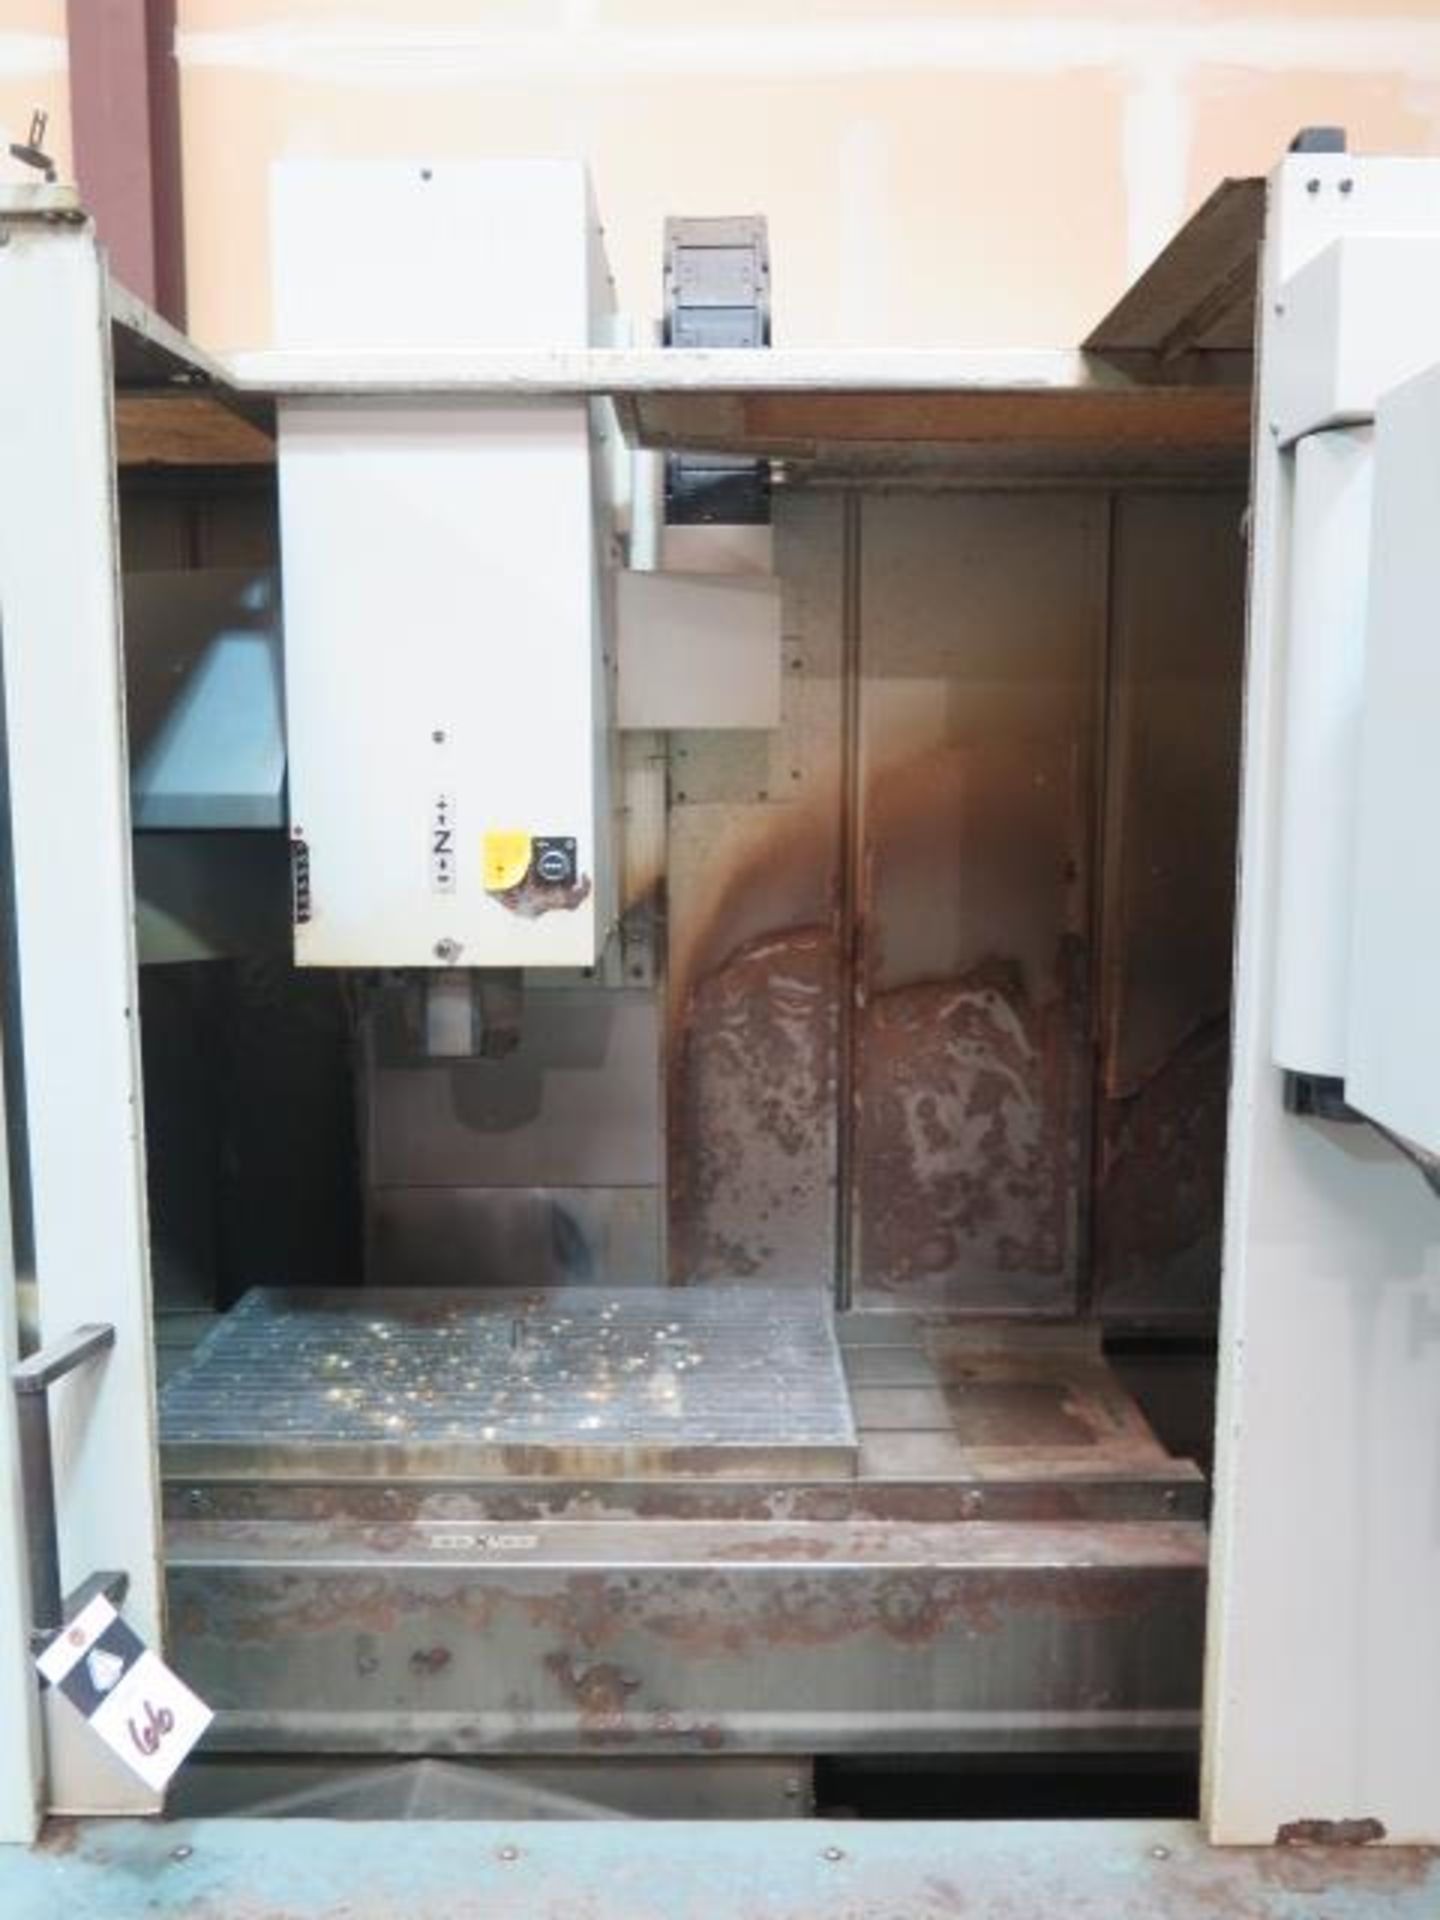 Tree / MAS VMC750 CNC Vertical Machining Center s/n 985961201 w/ Tree PC-2100 Controls, SOLD AS IS - Image 4 of 16